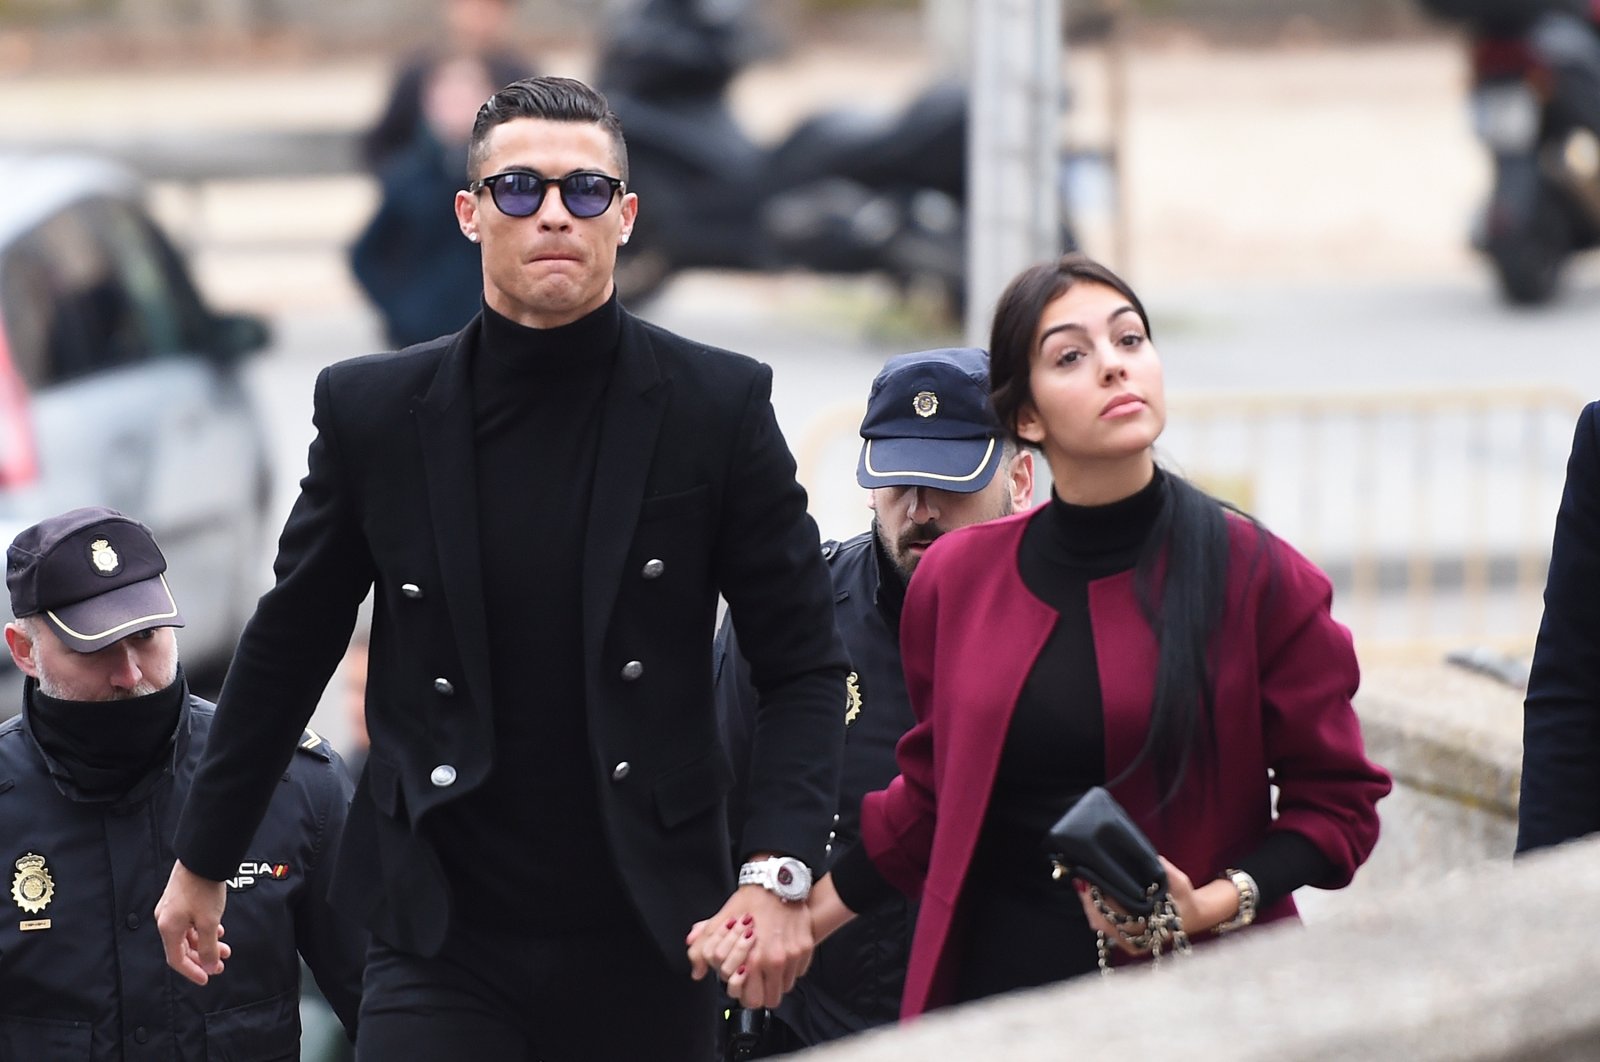 Cristiano Ronaldo (L) arrives with his girlfriend Georgina Rodriguez at the Audiencia Provincial de Madrid court, Madrid, Spain, Jan. 22, 2019. (Getty Images Photo)